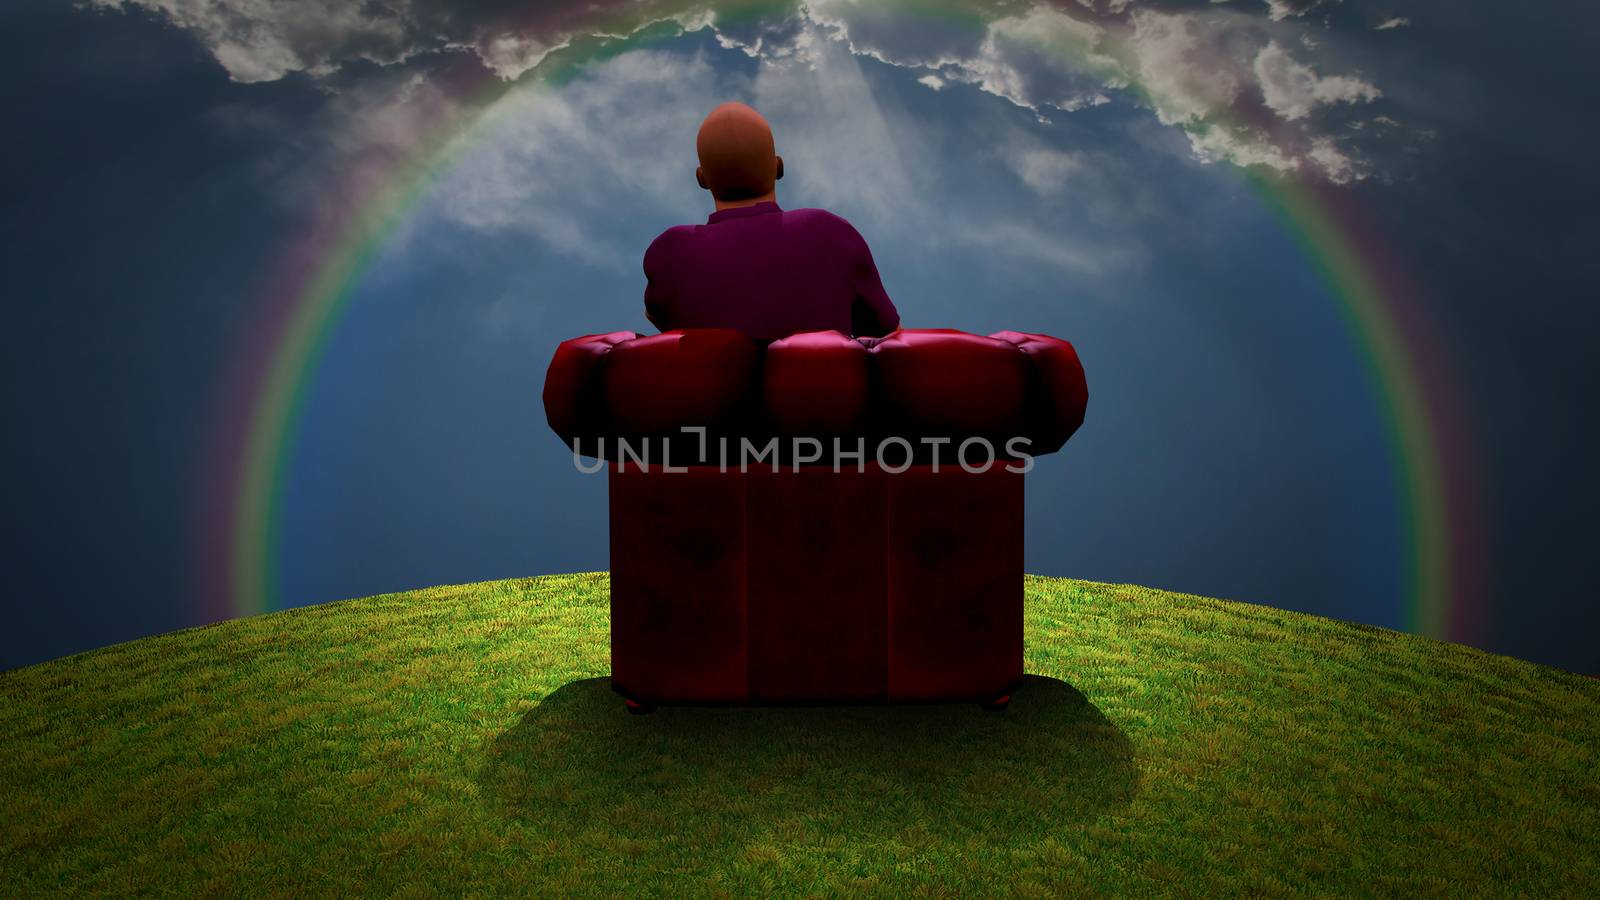 Surreal composition. Man sits in red armchair and observes rainbow in cloudy sky. 3D rendering